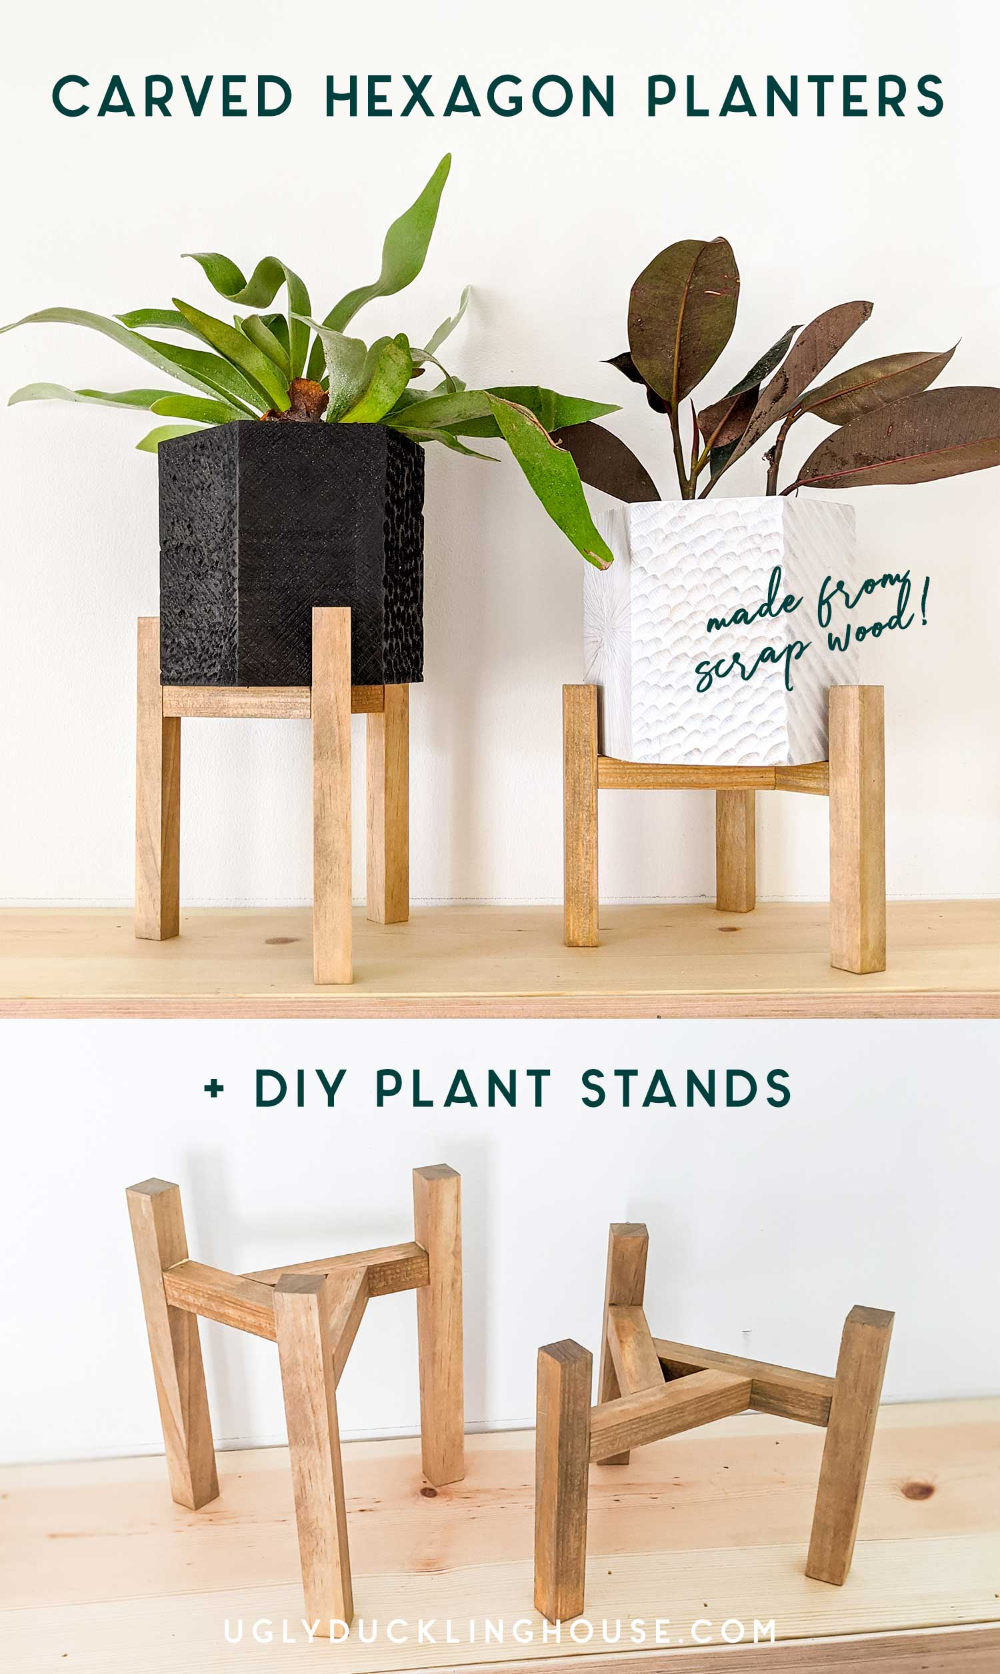 Carved Hexagon Planters + Plant Stands -   diy Projects with wood